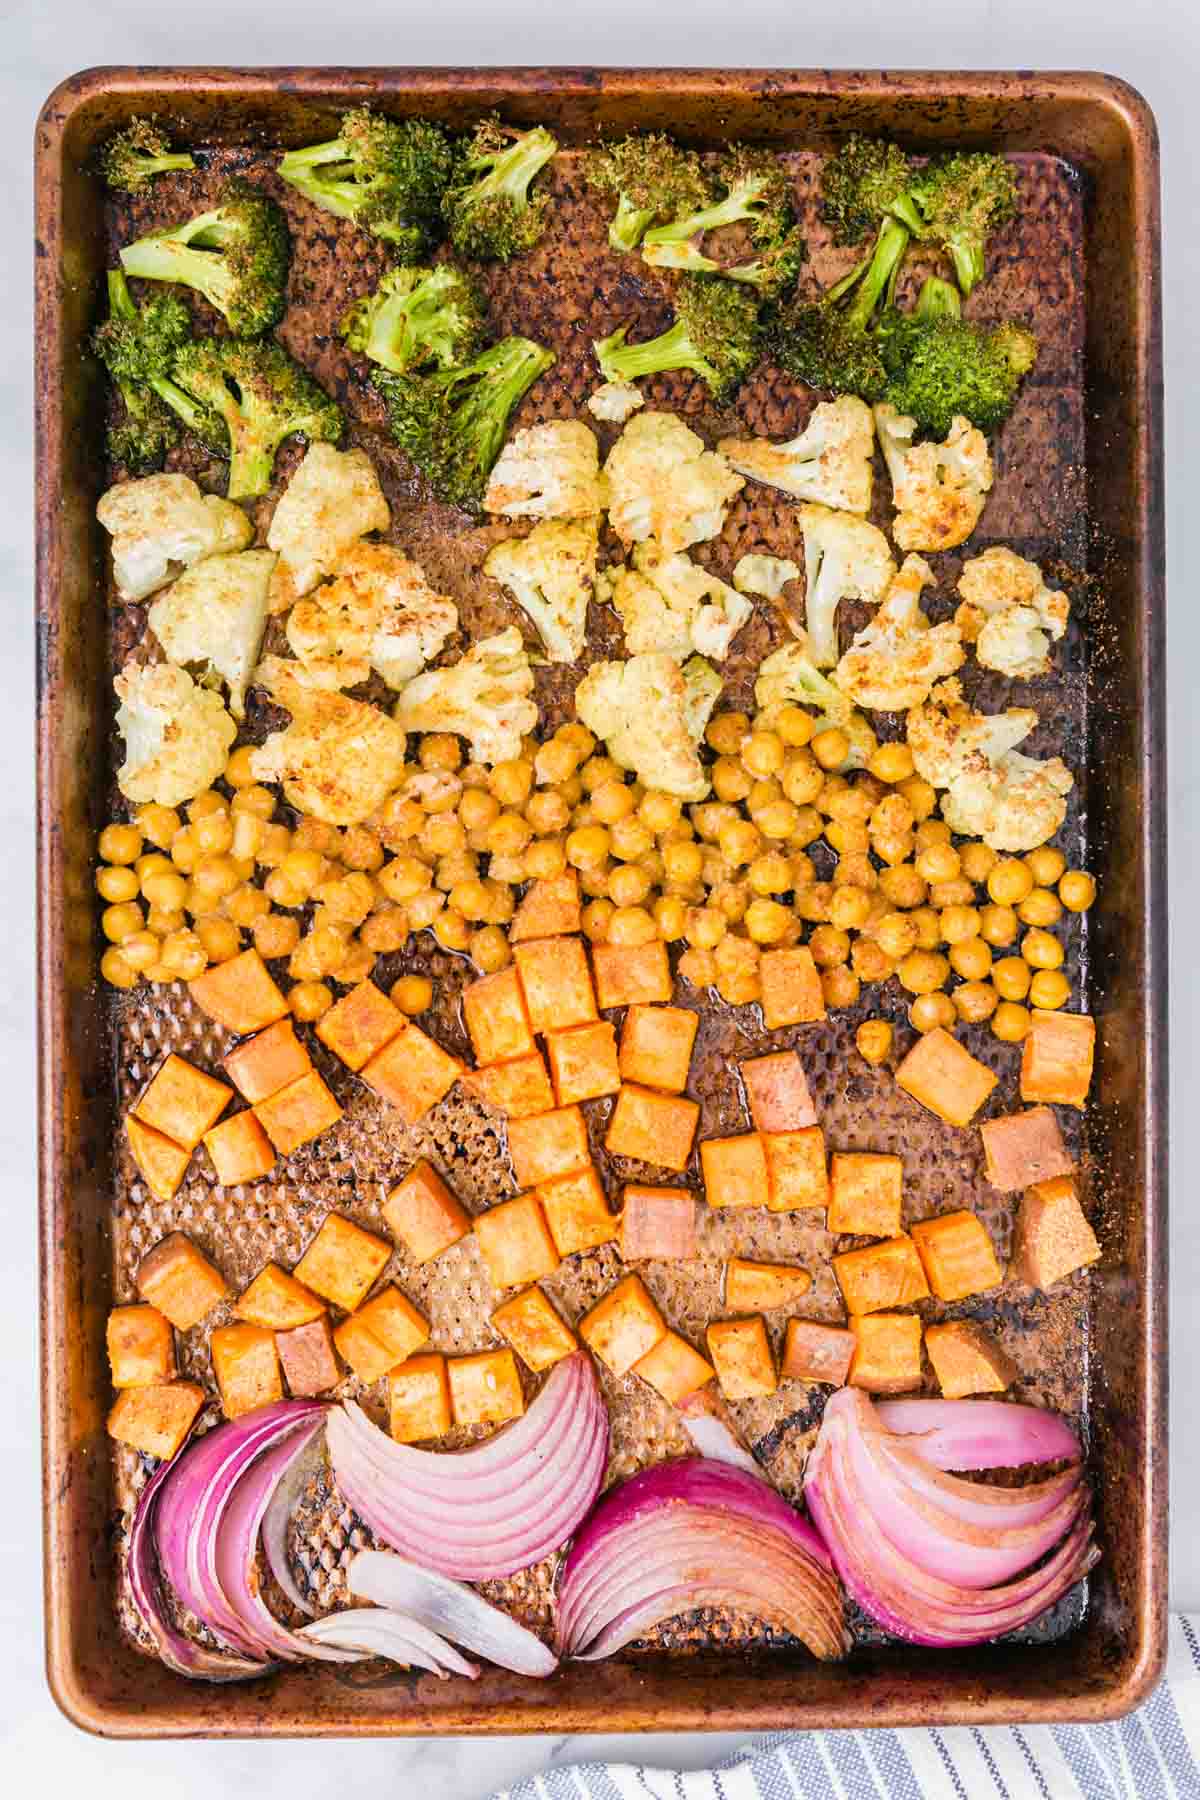 Assorted seasoned and roasted vegetables on a sheet pan.